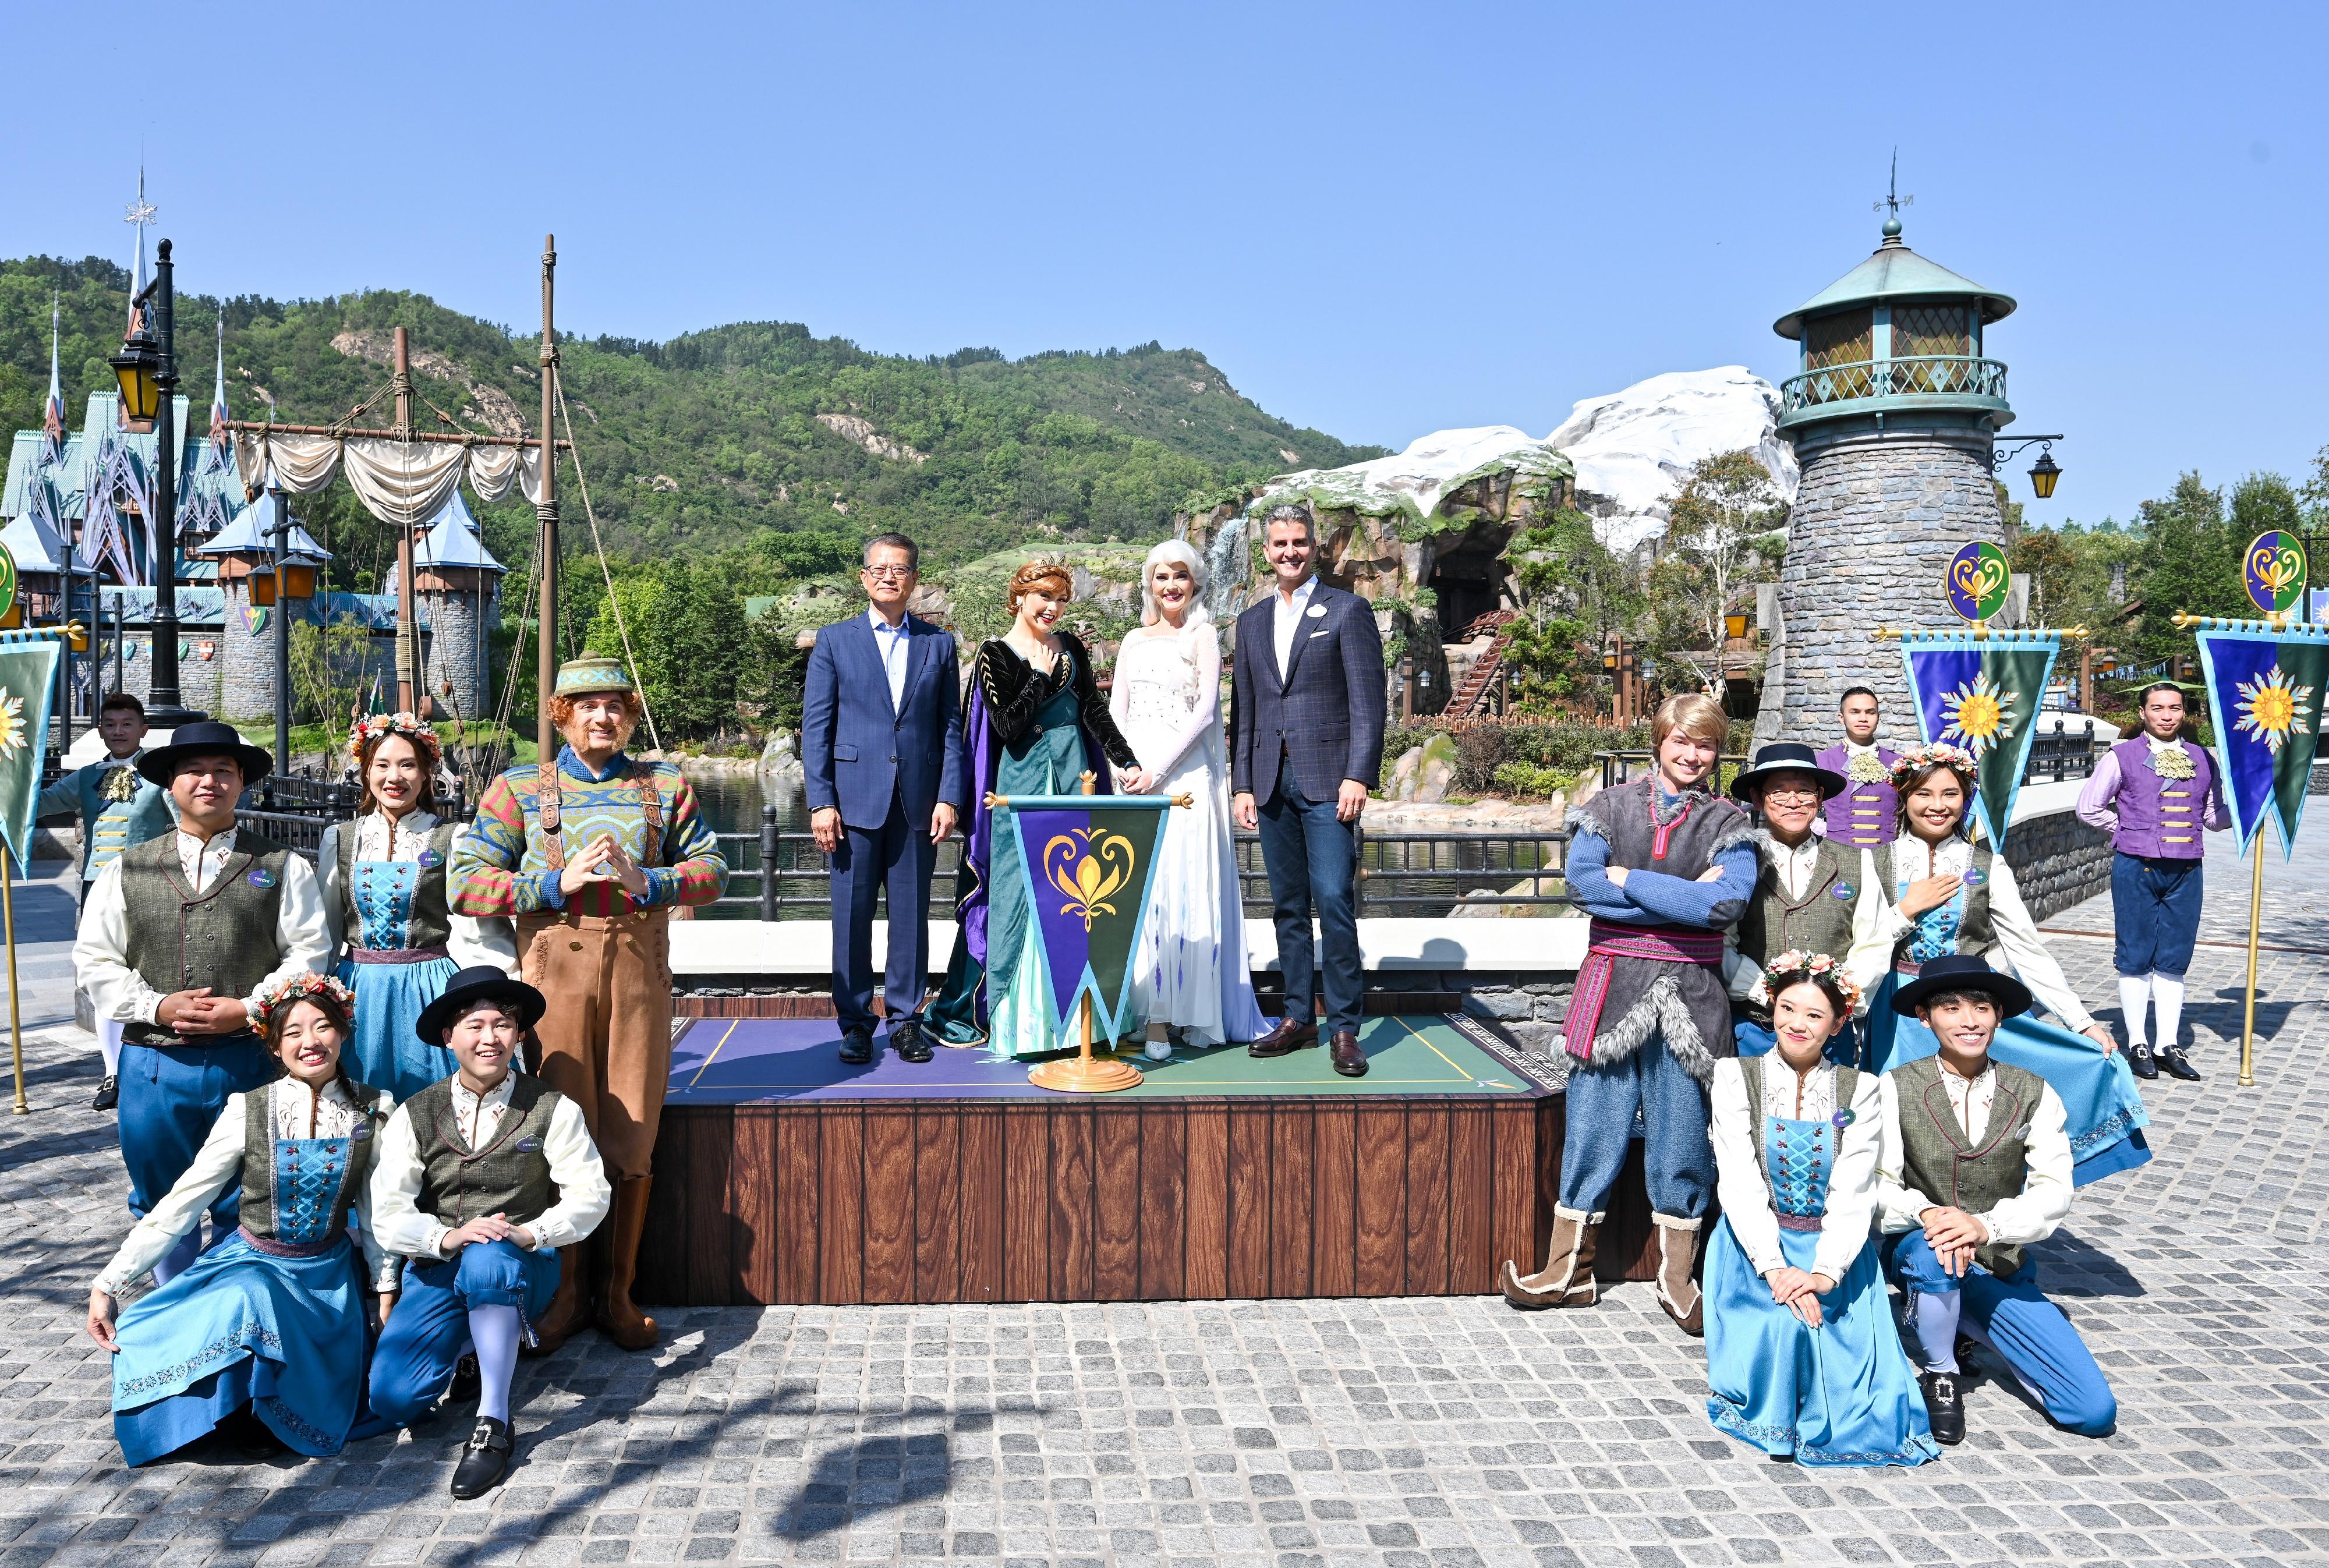 The Financial Secretary, Mr Paul Chan, attended the Hong Kong Disneyland Resort "A Welcome Ceremony for World of Frozen" today (November 20). Photo shows Mr Chan (third row, first left) and the Chairman of Disney Parks, Experiences and Products of the Walt Disney Company, Mr Josh D'Amaro (third row, first right), officiating at the welcome ceremony.
